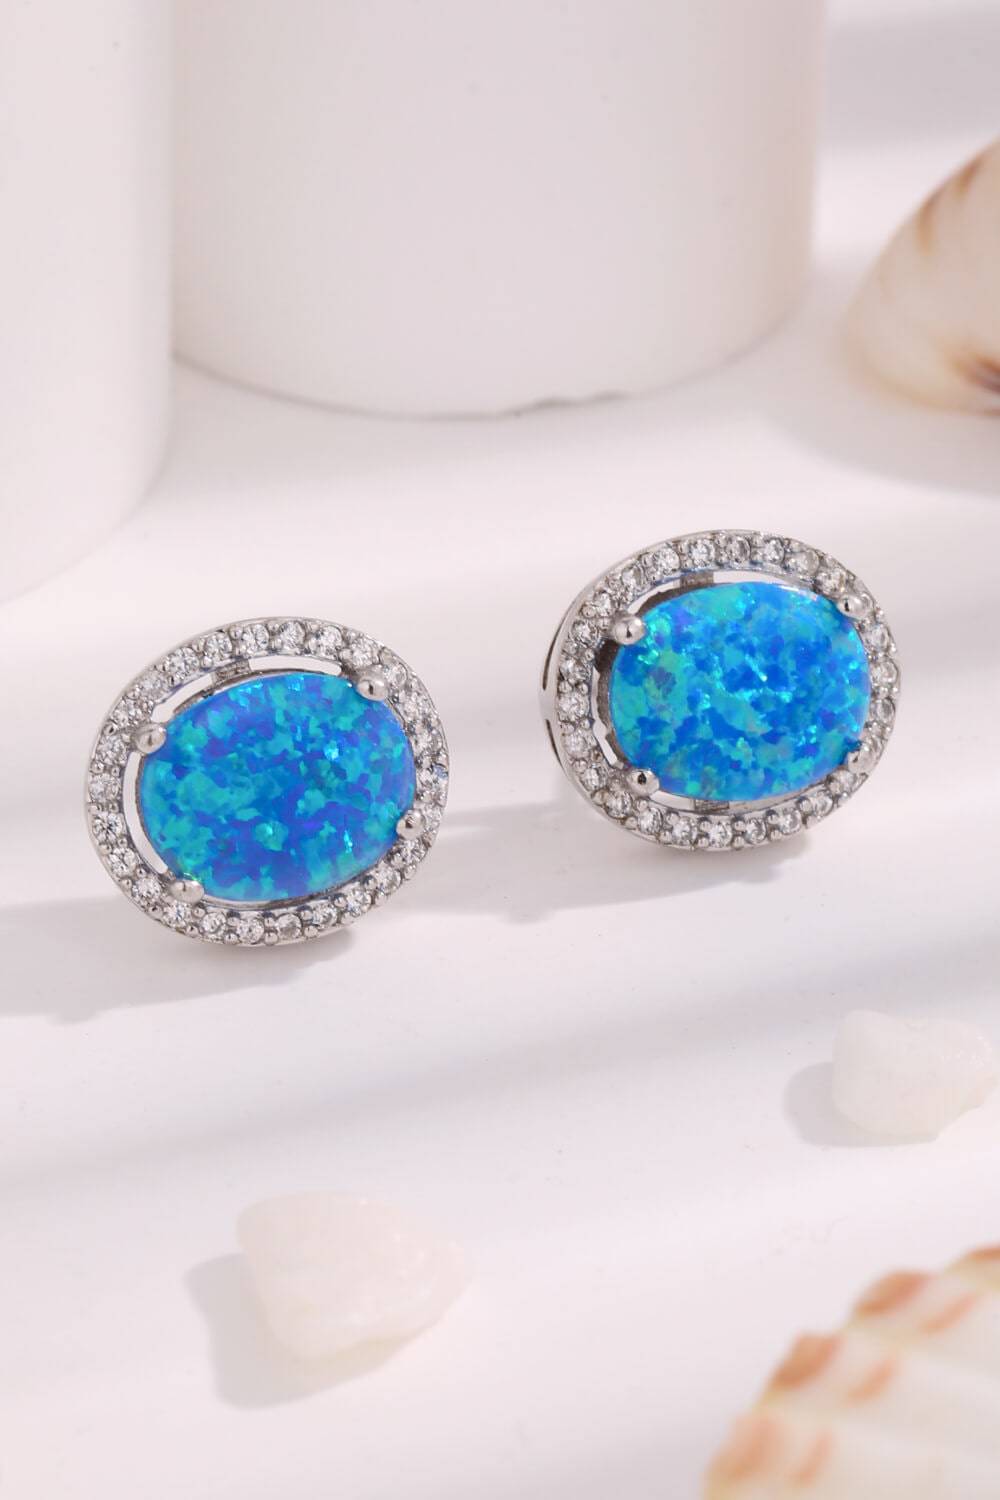 Opal Round Earrings - Sparkling Love from the Depths of Australia - A Timeless Treasure for Your Eternal Romance - Guy Christopher